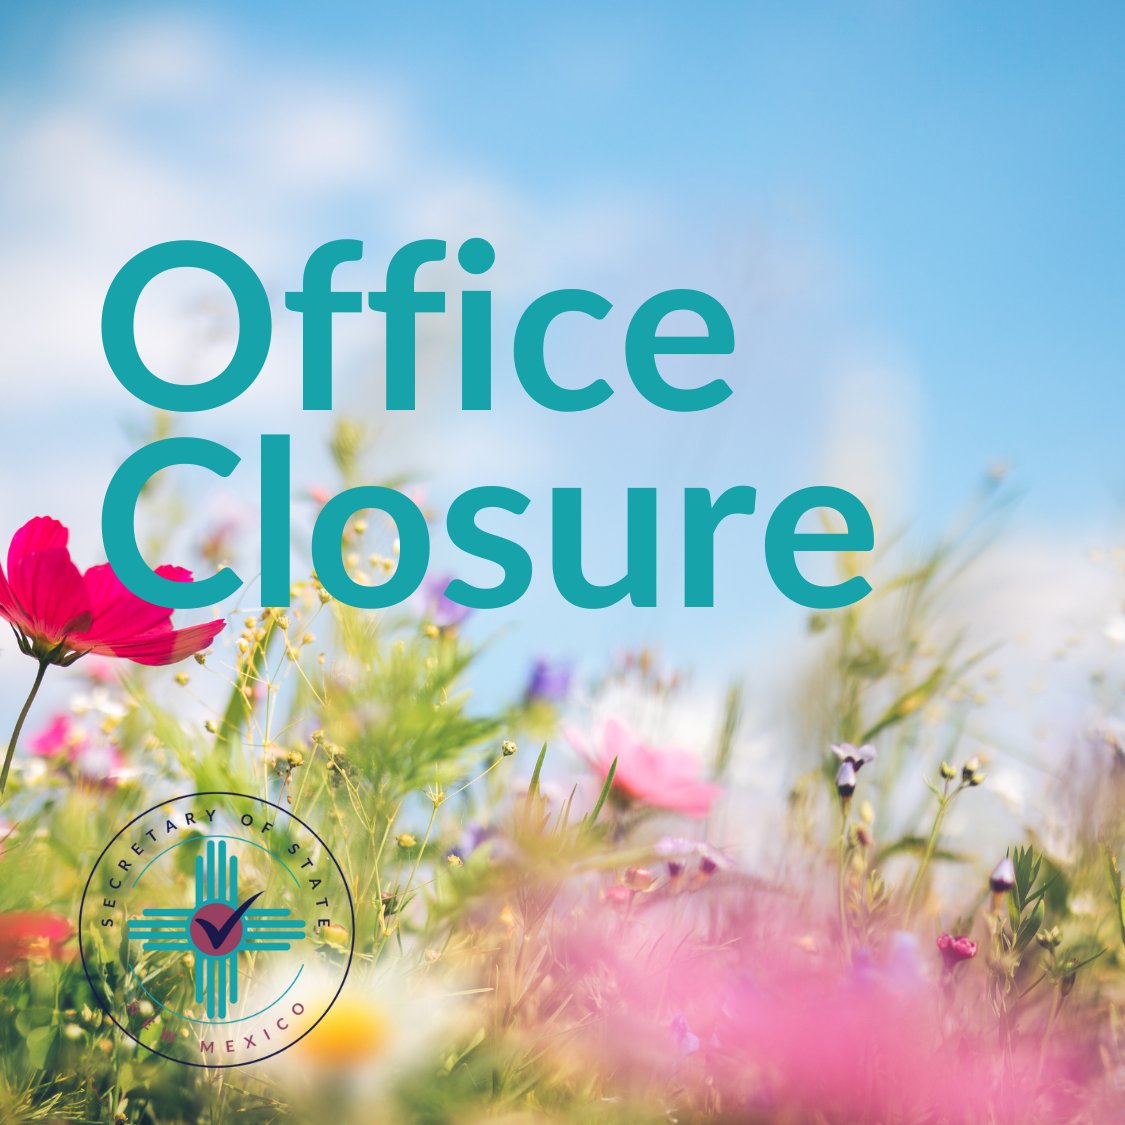 NOTICE: Our office will close at noon on Friday, March 29th for seasonal observances.